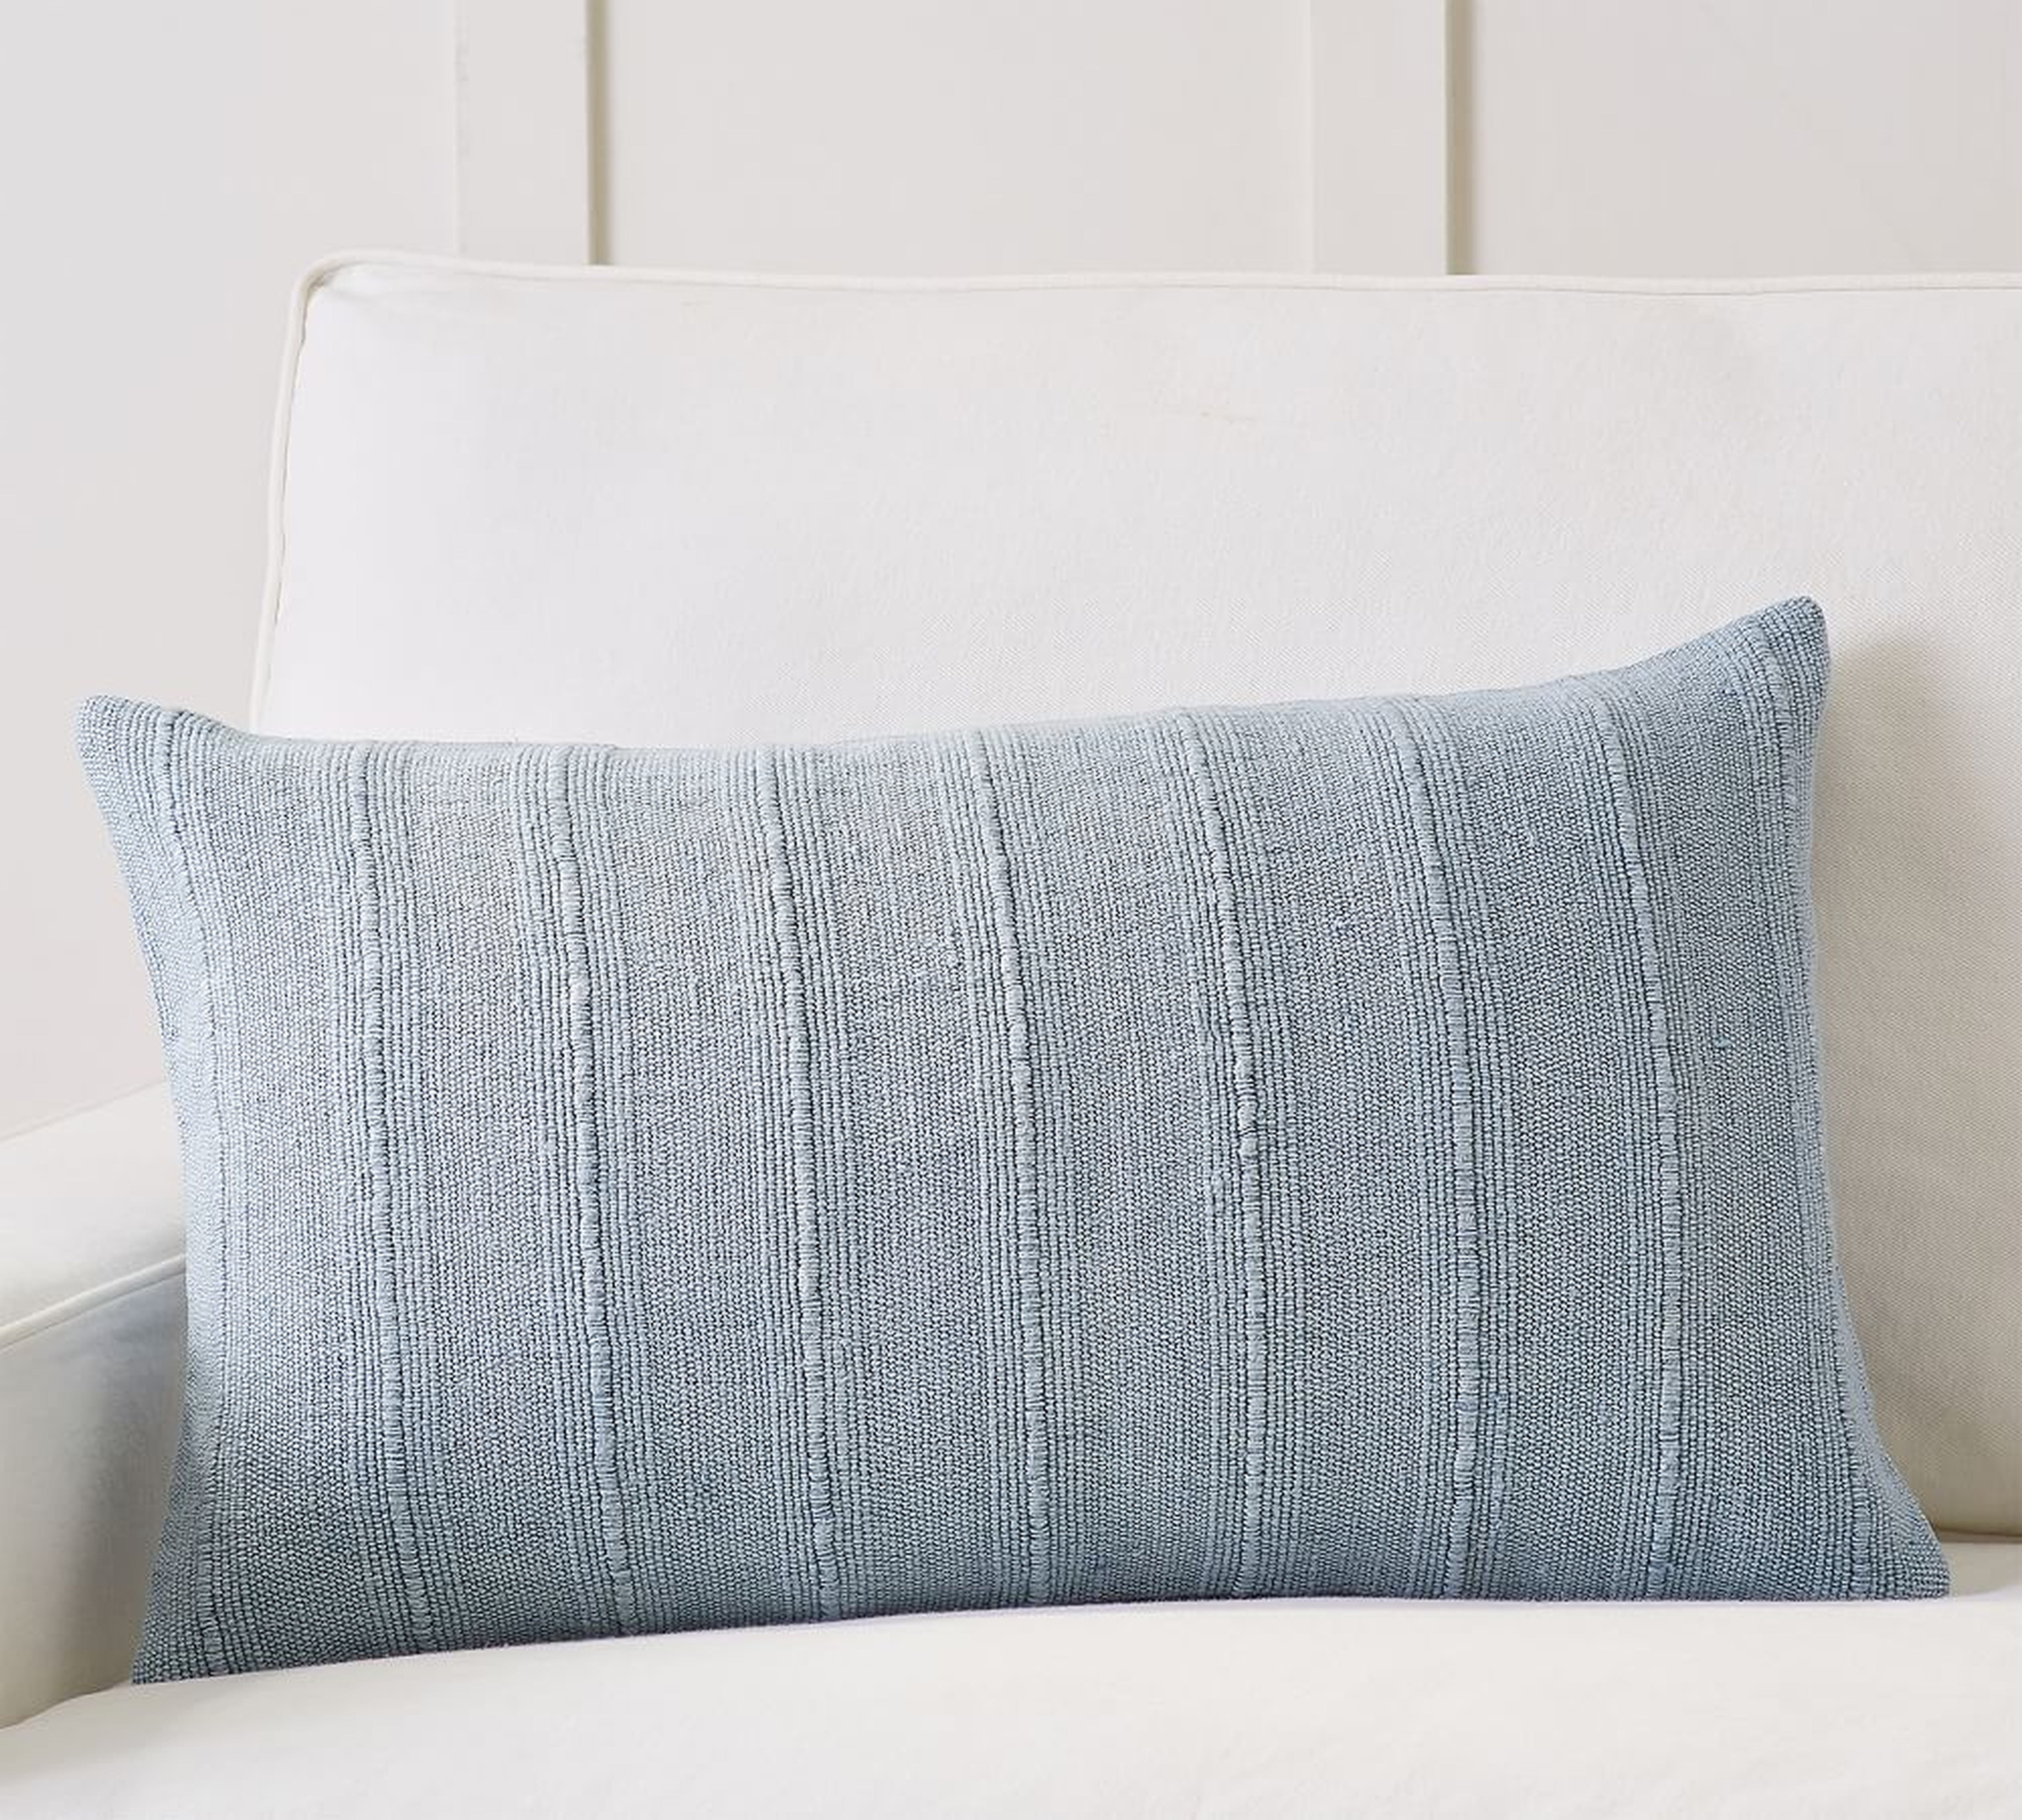 Relaxed Striped Lumbar Pillow Cover, 16 x 26", Chambray - Pottery Barn